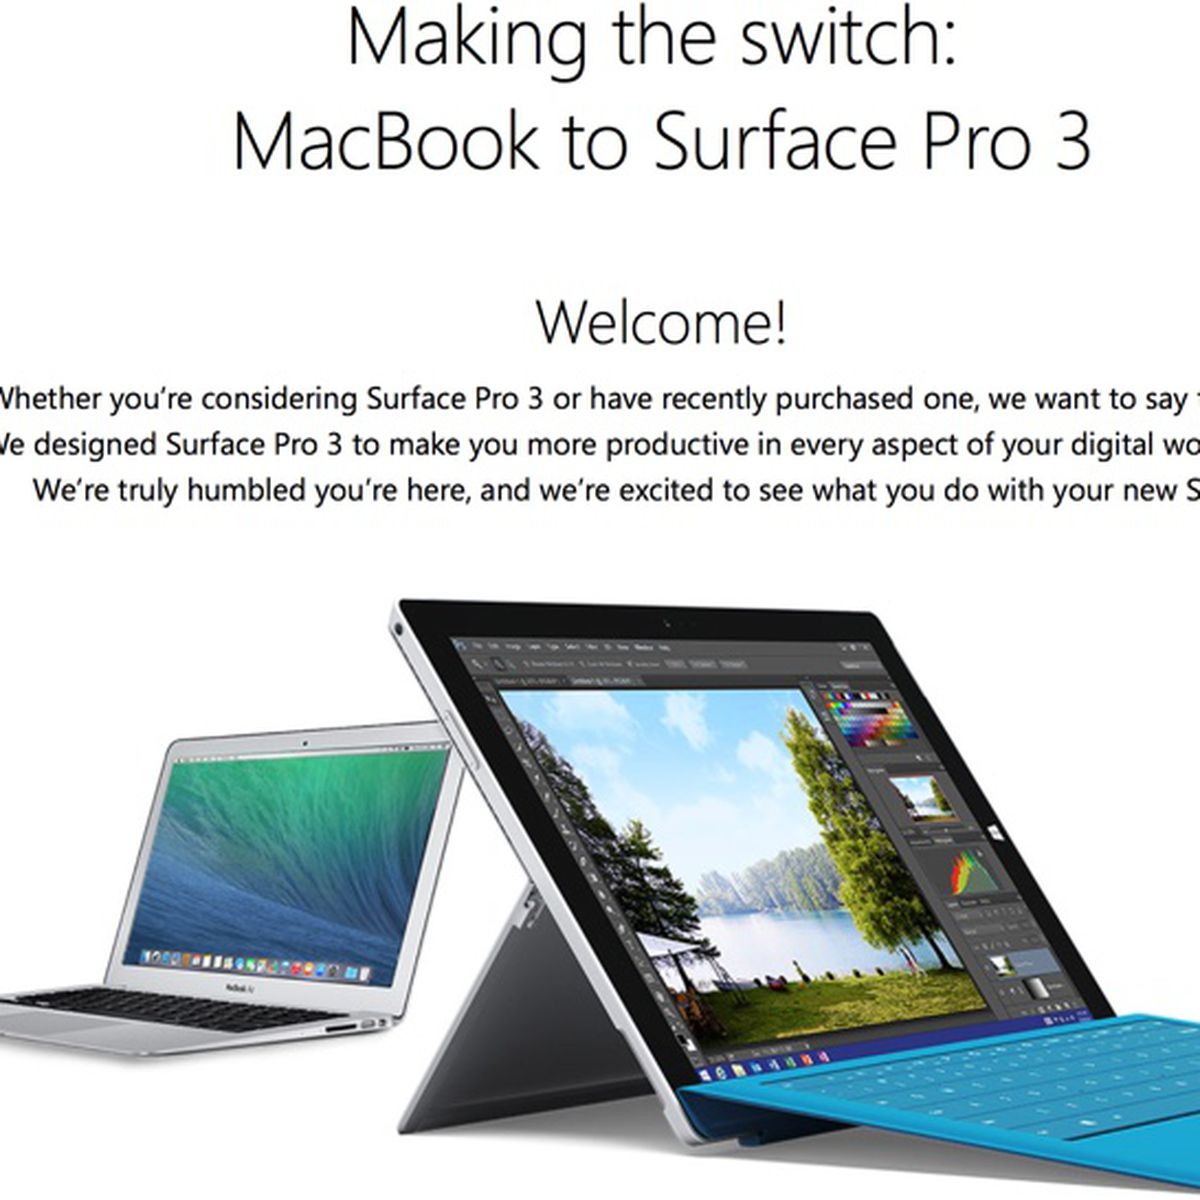 Microsoft Launches Site To Lure Macbook Switchers To Surface Pro 3 Macrumors